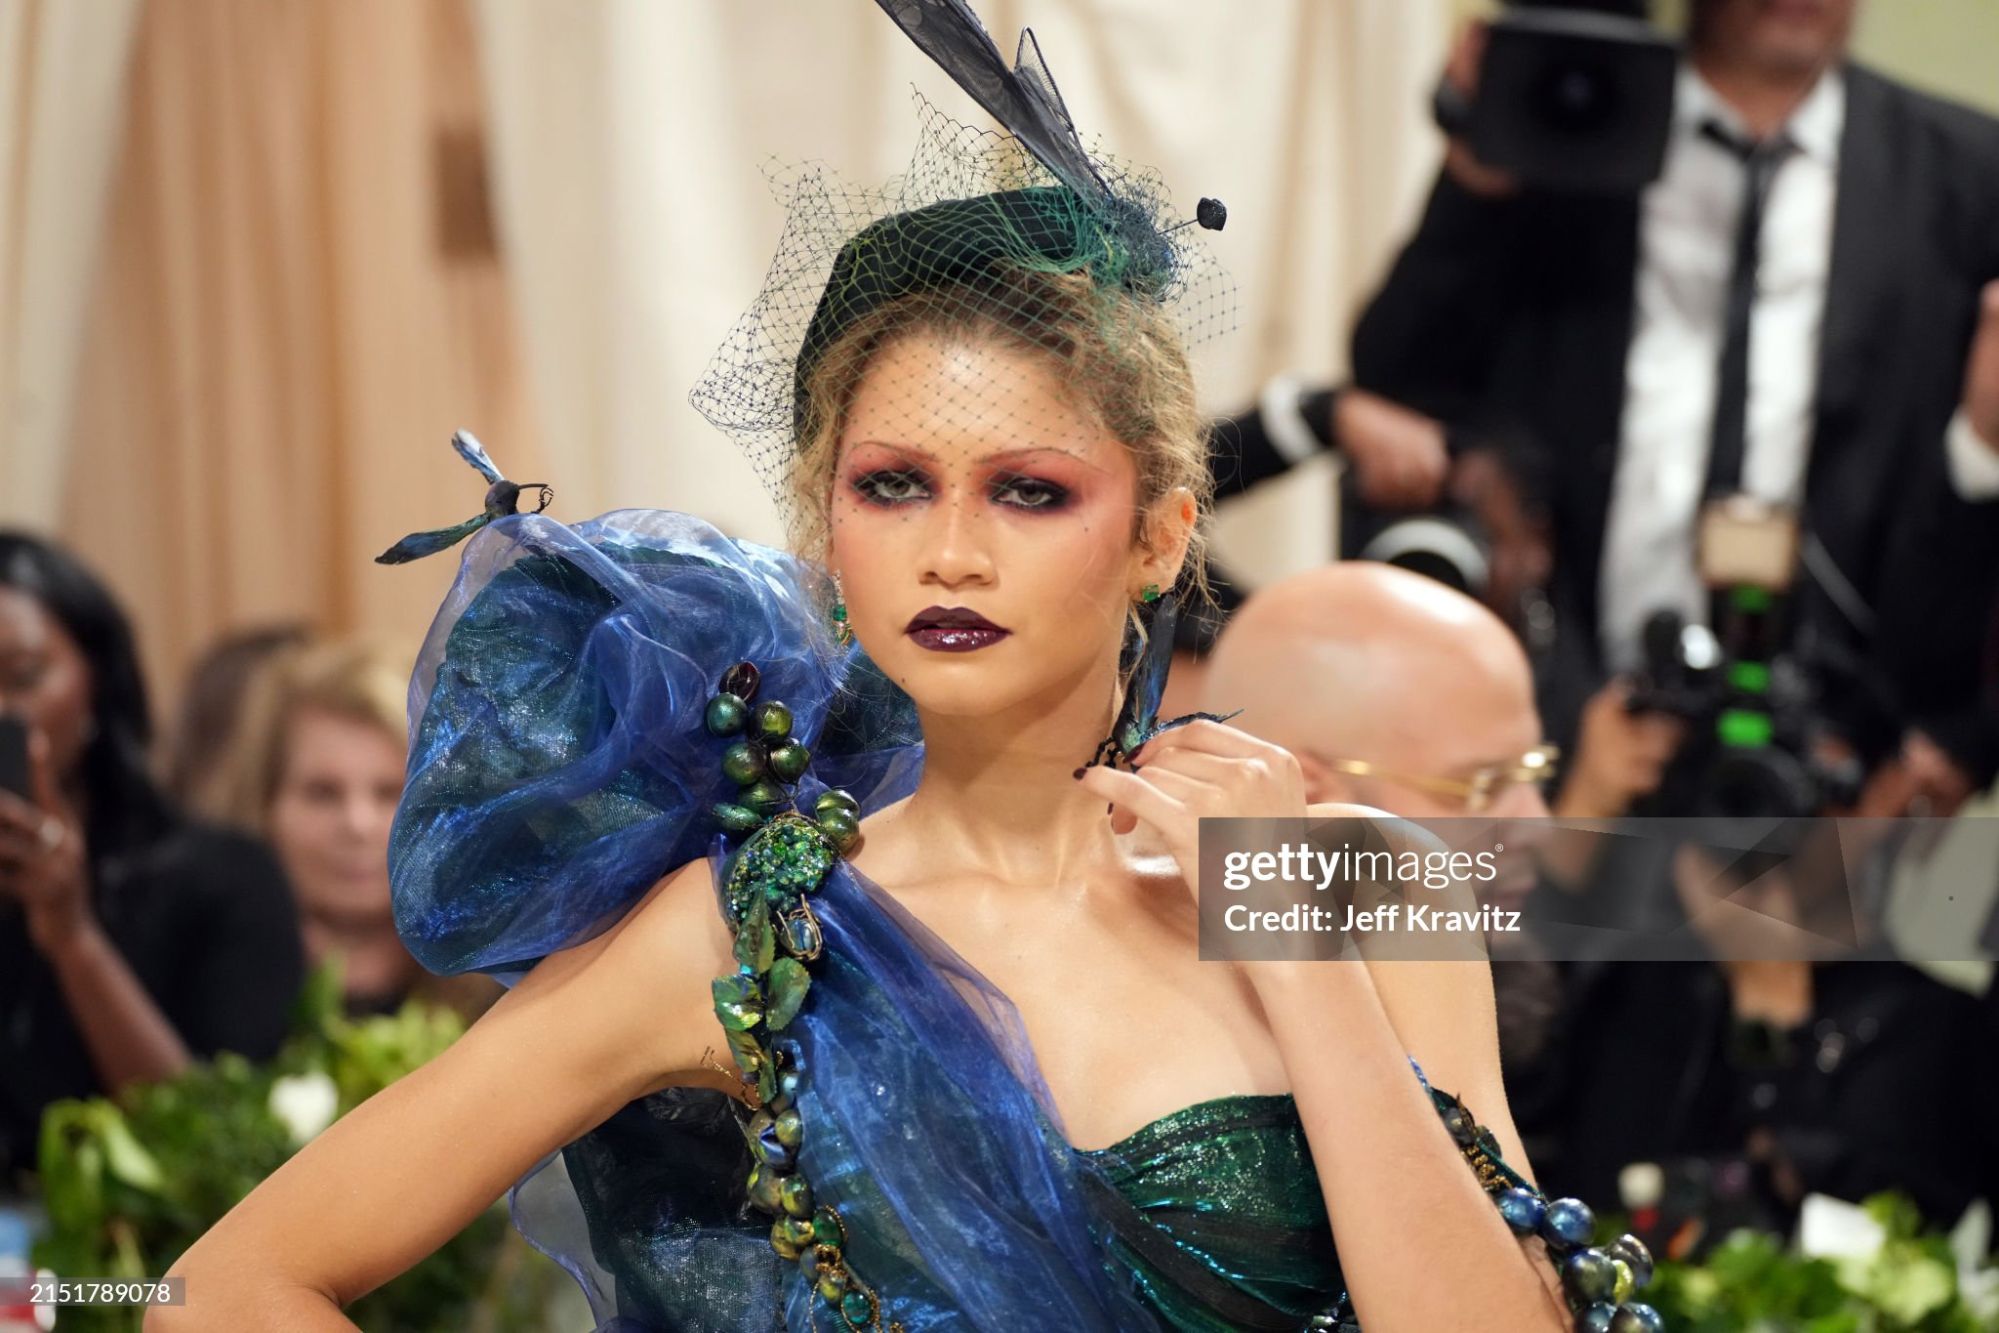 gettyimages-2151789078-2048x2048.jpg